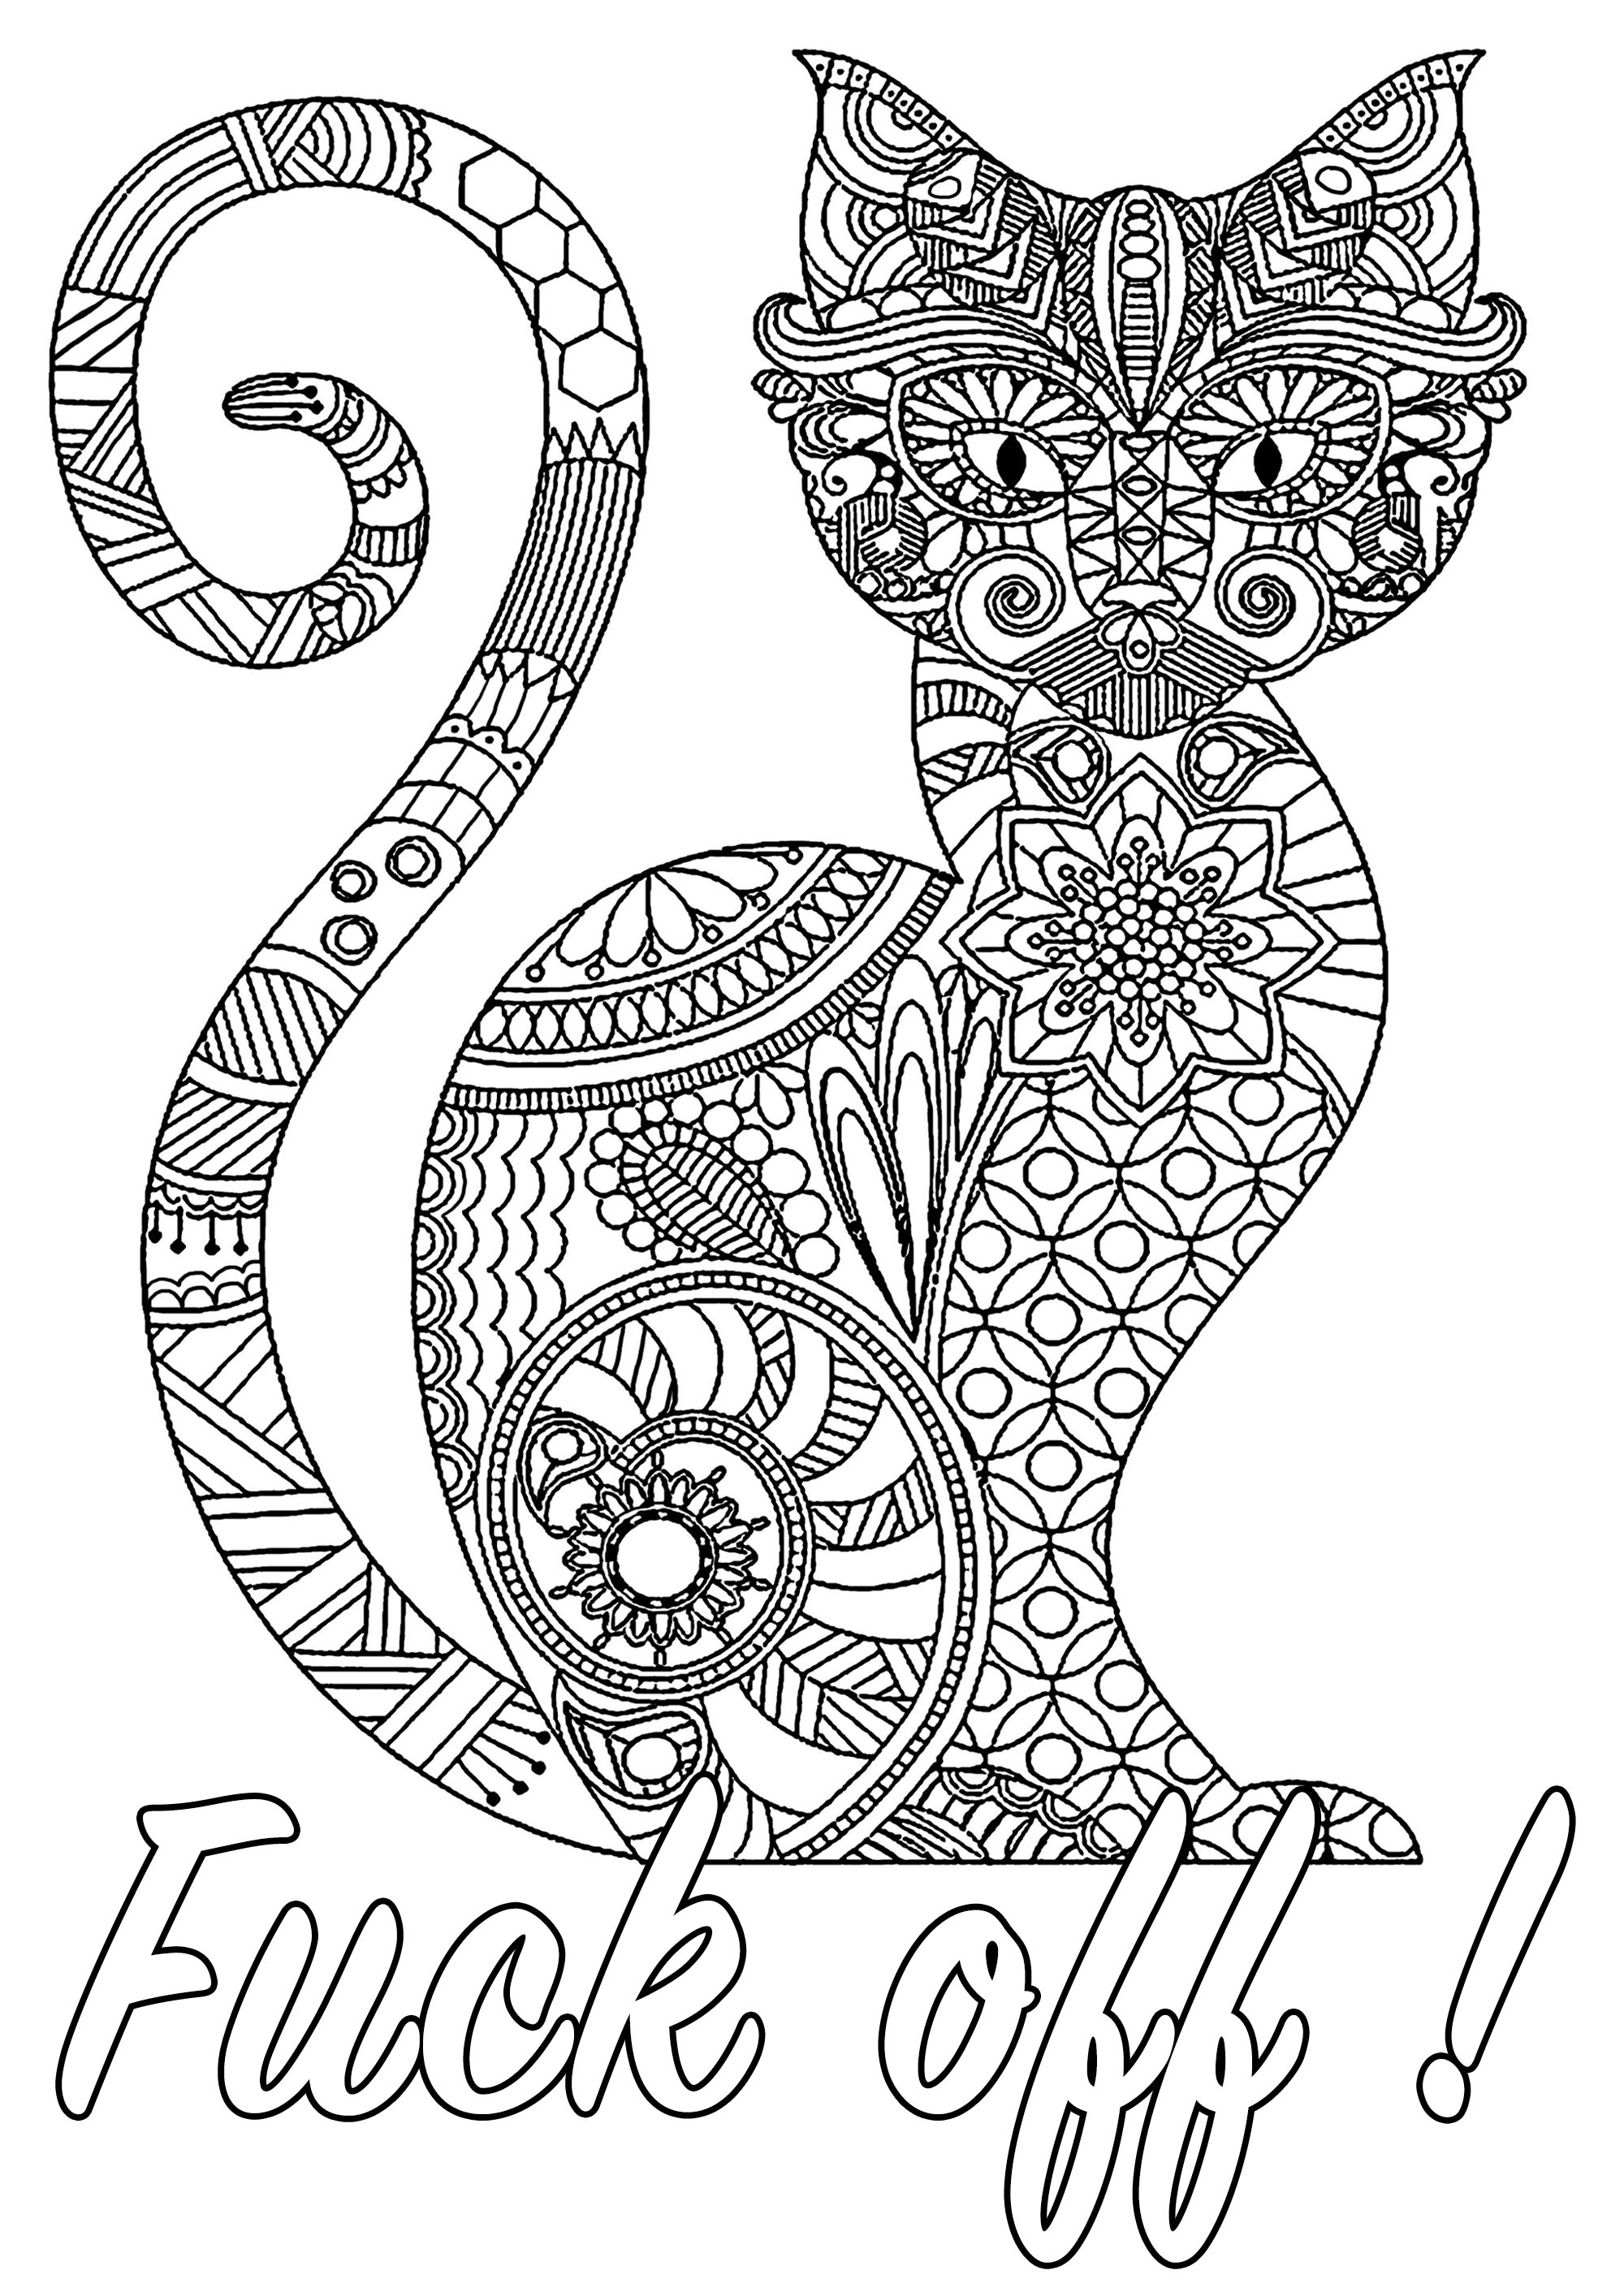 Fuck Off Swear Word Coloring Page Swear Word Adult Coloring Pages